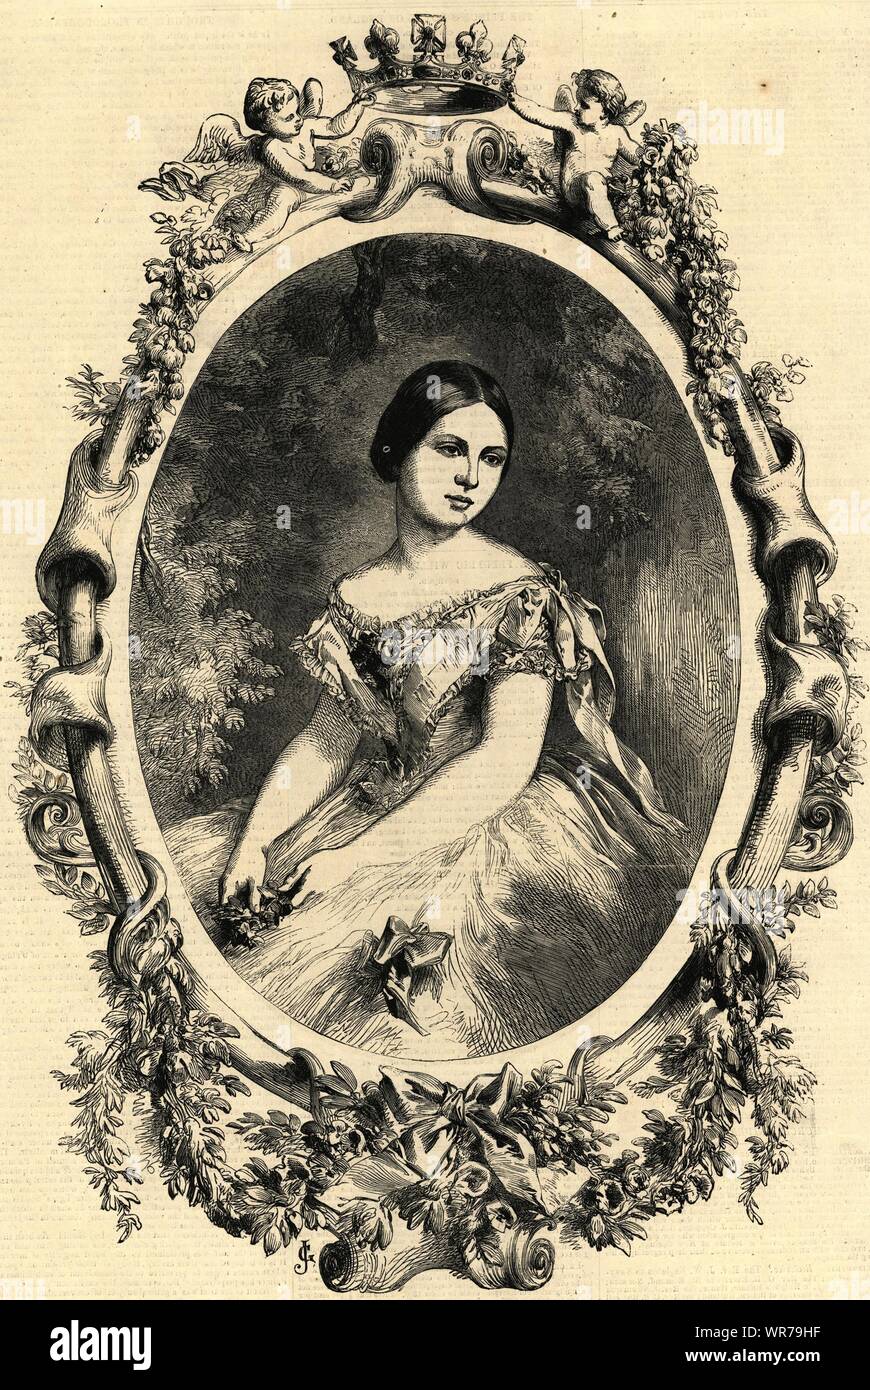 Her Royal Highness the Princess Royal of England. Royalty 1856 ILN full page Stock Photo